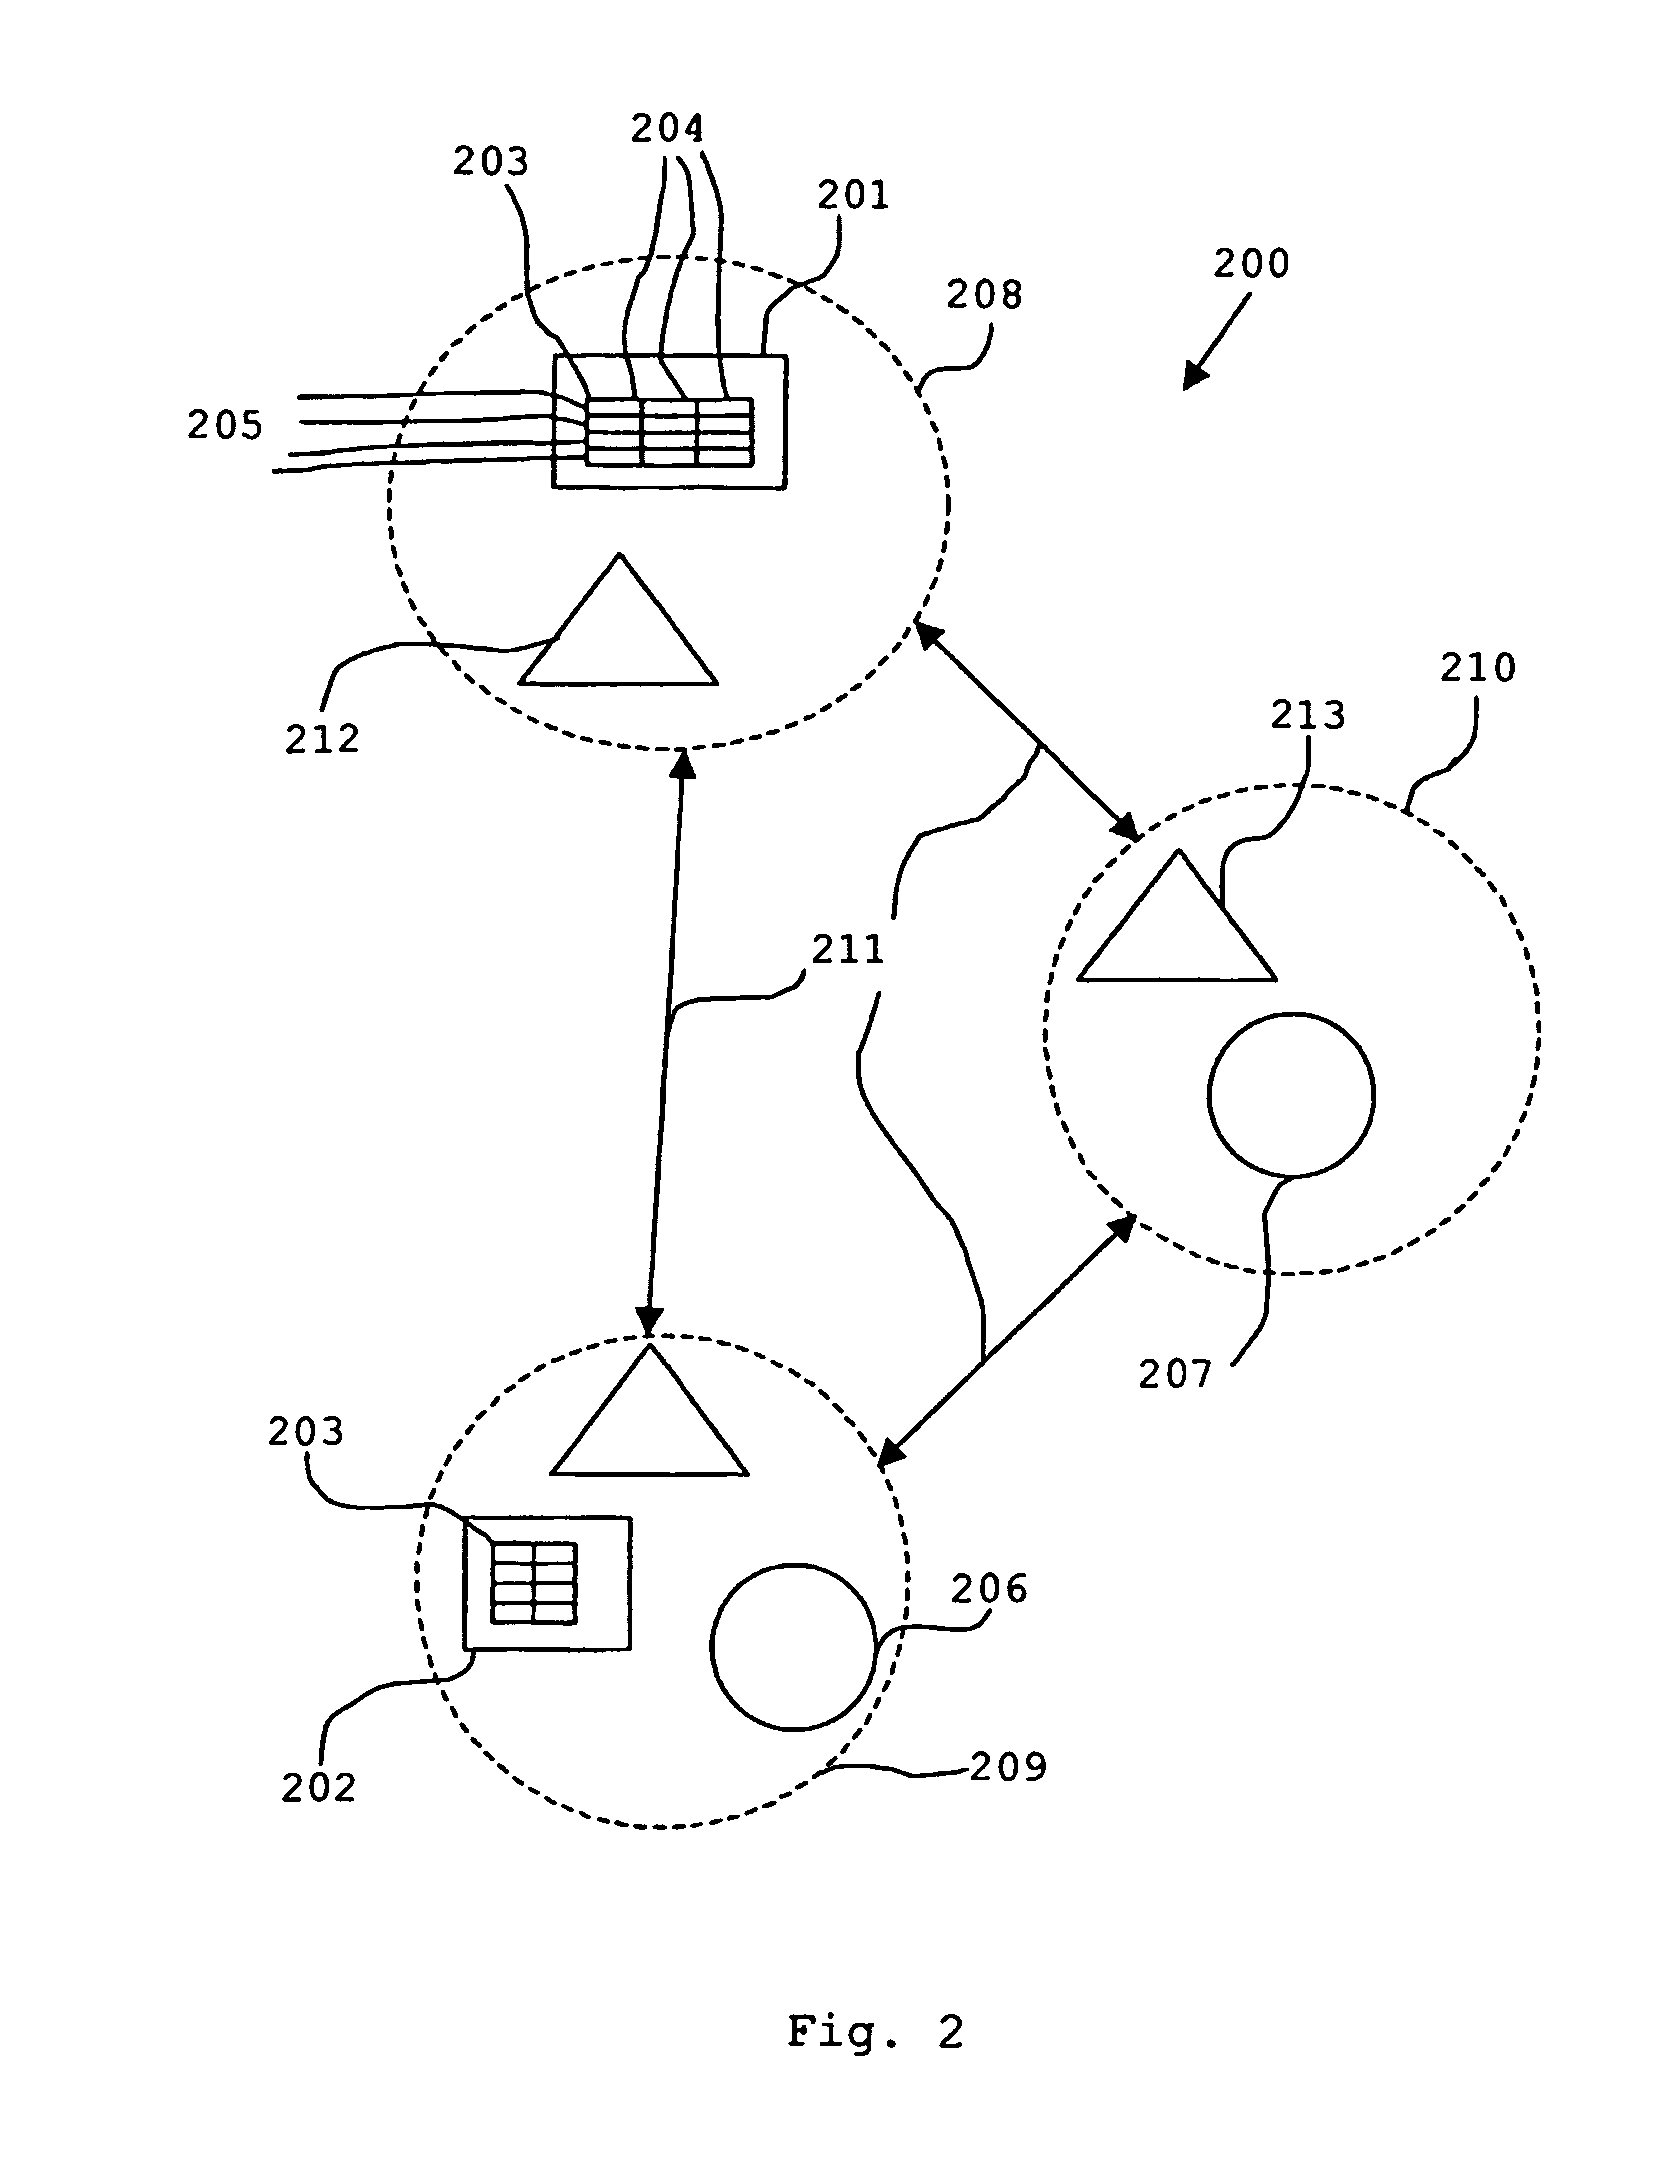 Shared storage network system and a method for operating a shared storage network system